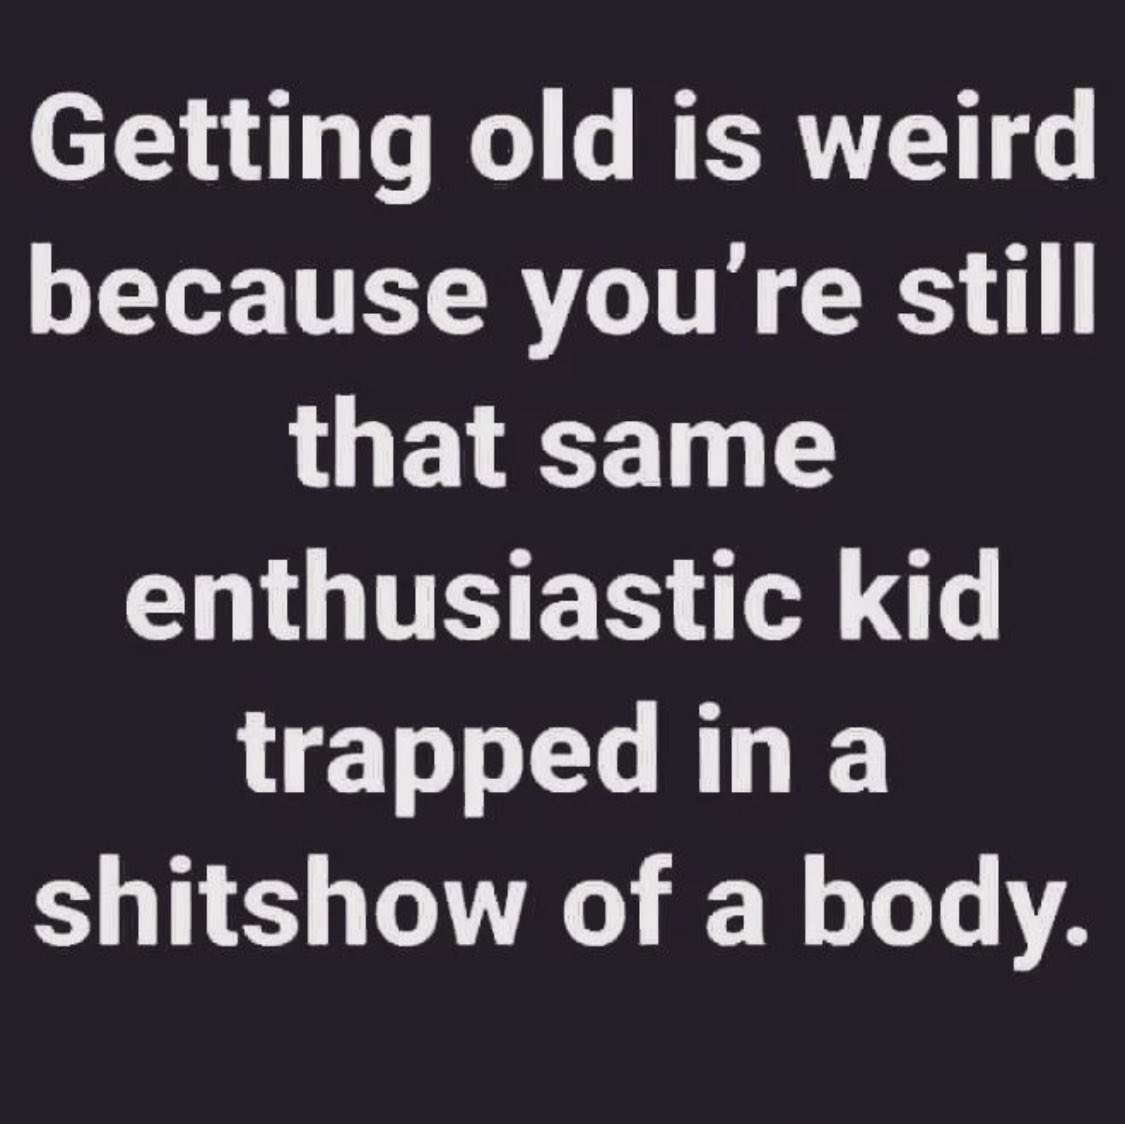 Who still feels young?